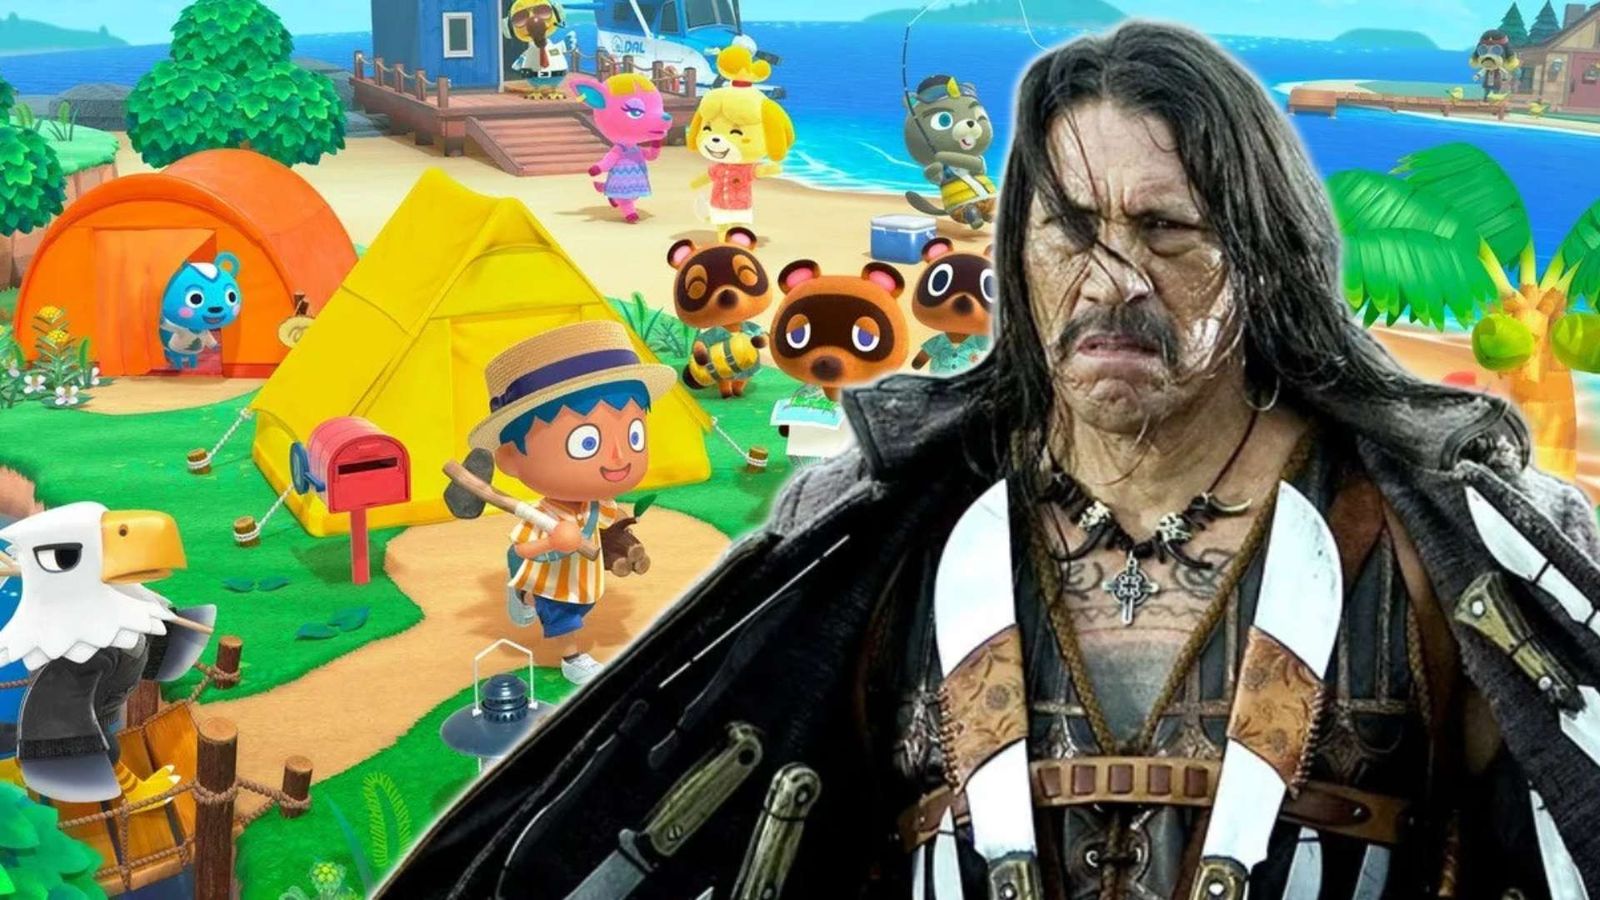 Danny Trejo is standing in front of Animal Crossing New Horizons